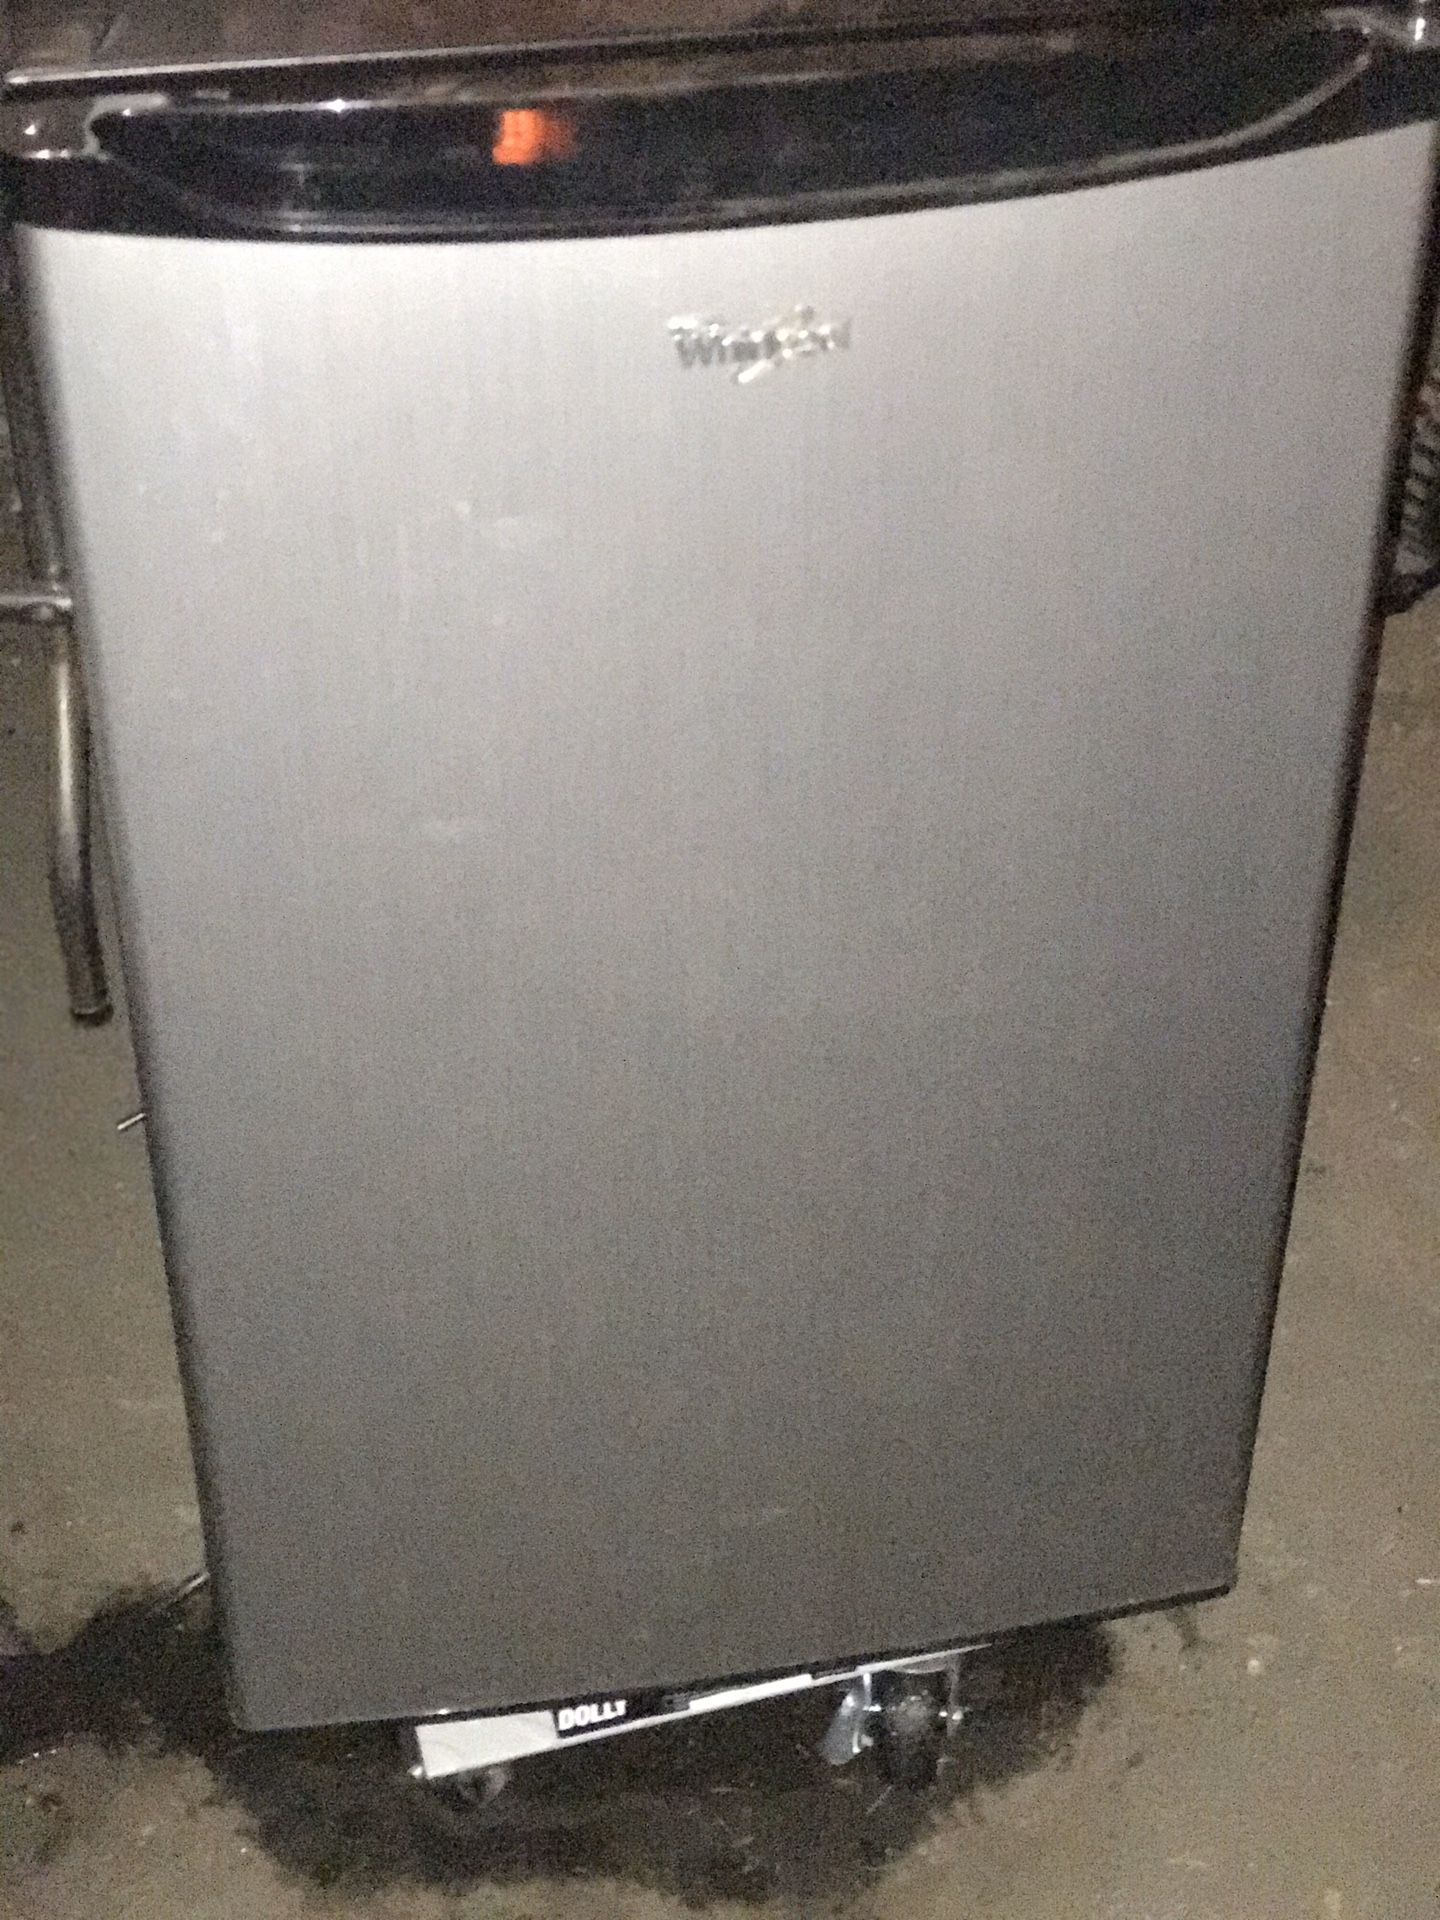 Whirlpool 4.3 cubic foot refrigerator very good condition